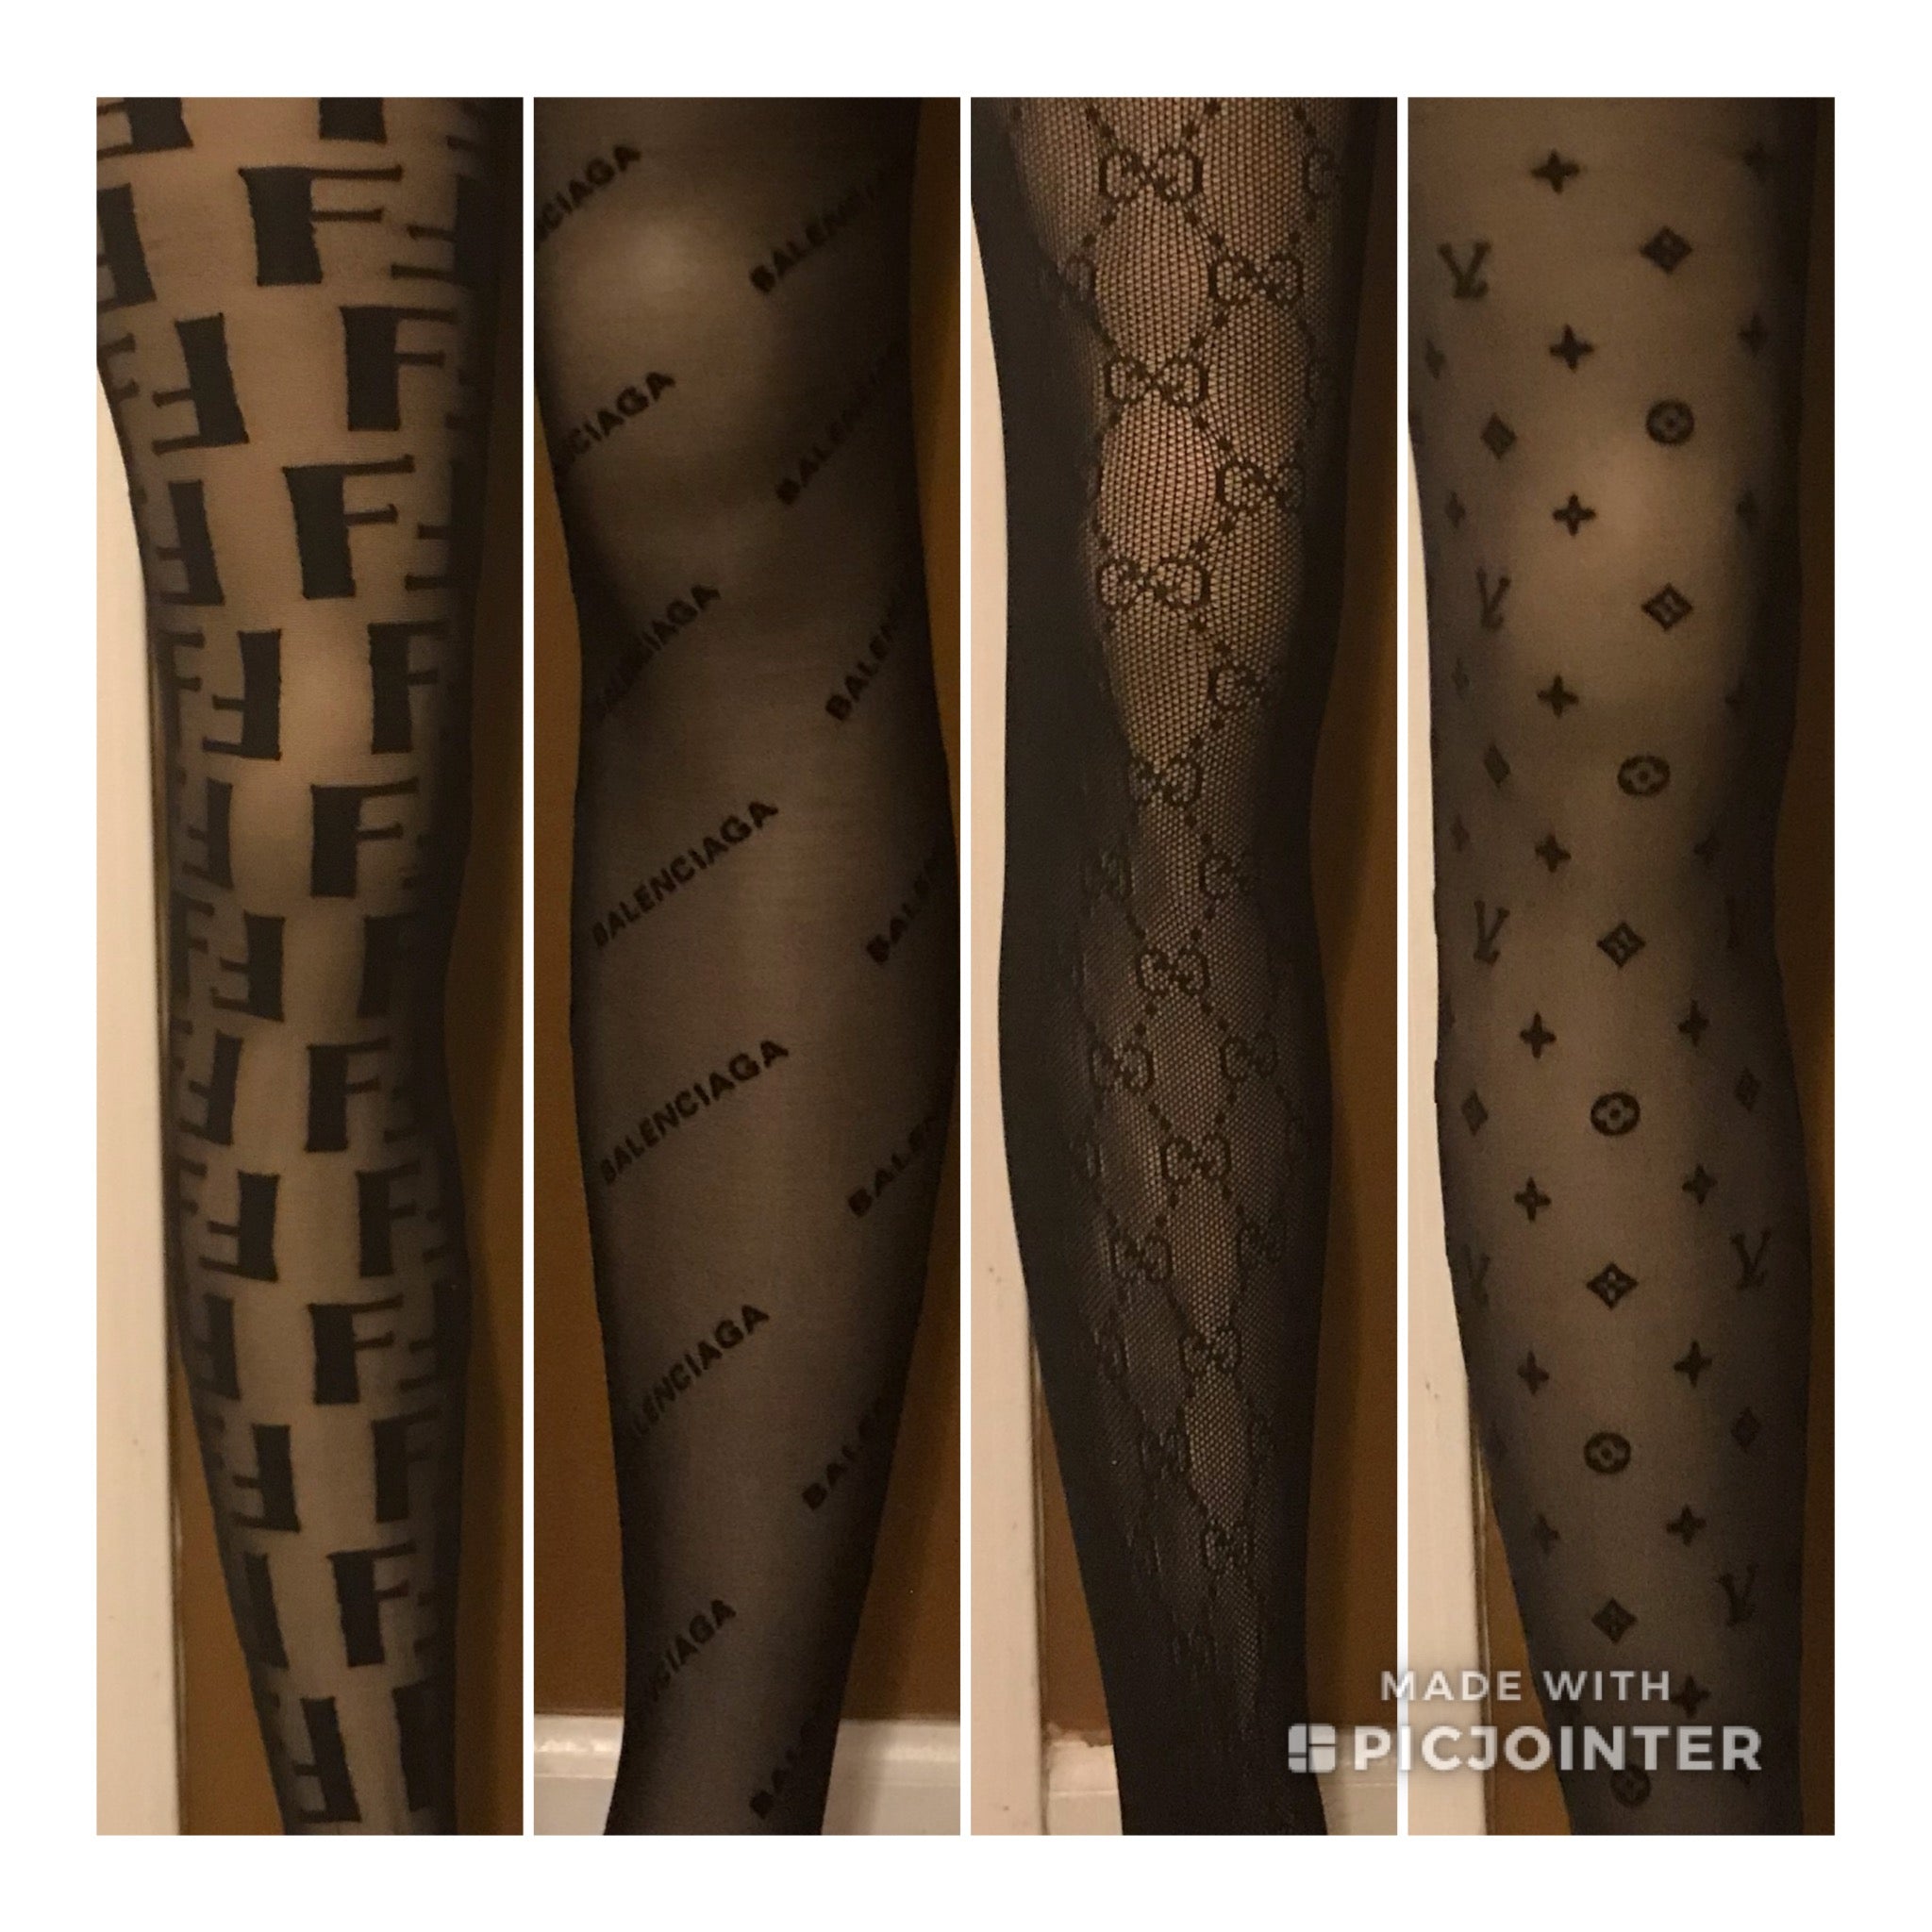 Chic Louis Vuitton LV designer luxury stockings tights only $49